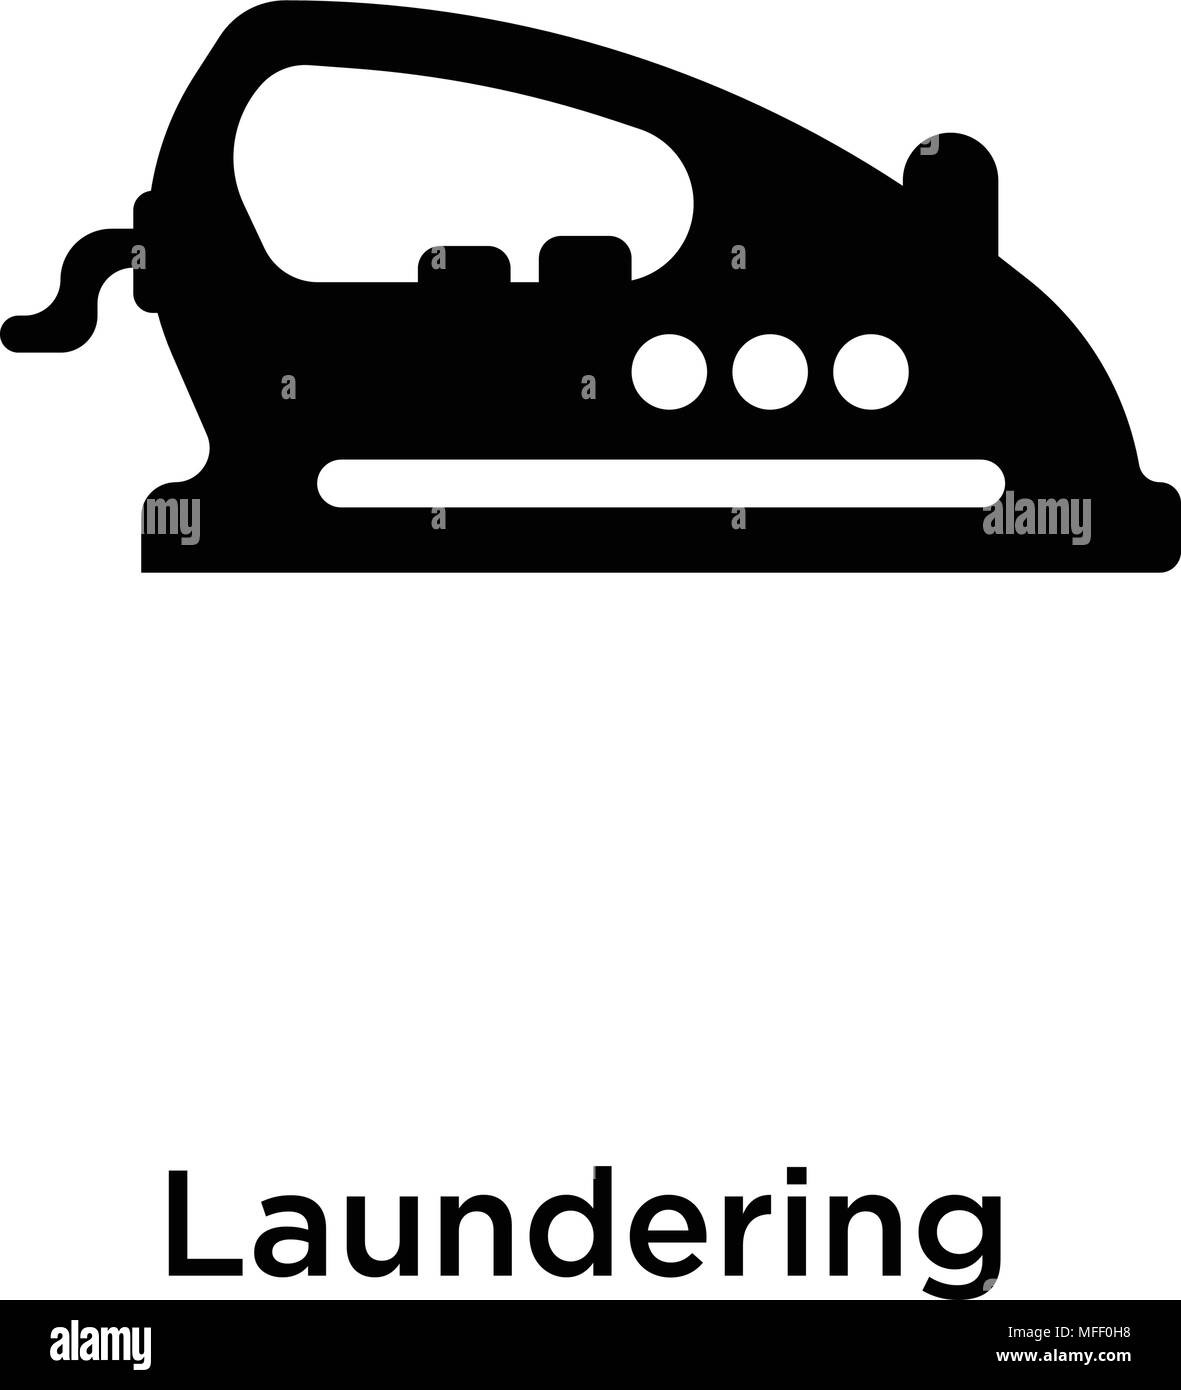 Laundering icon isolated on white background, vector illustration Stock Vector